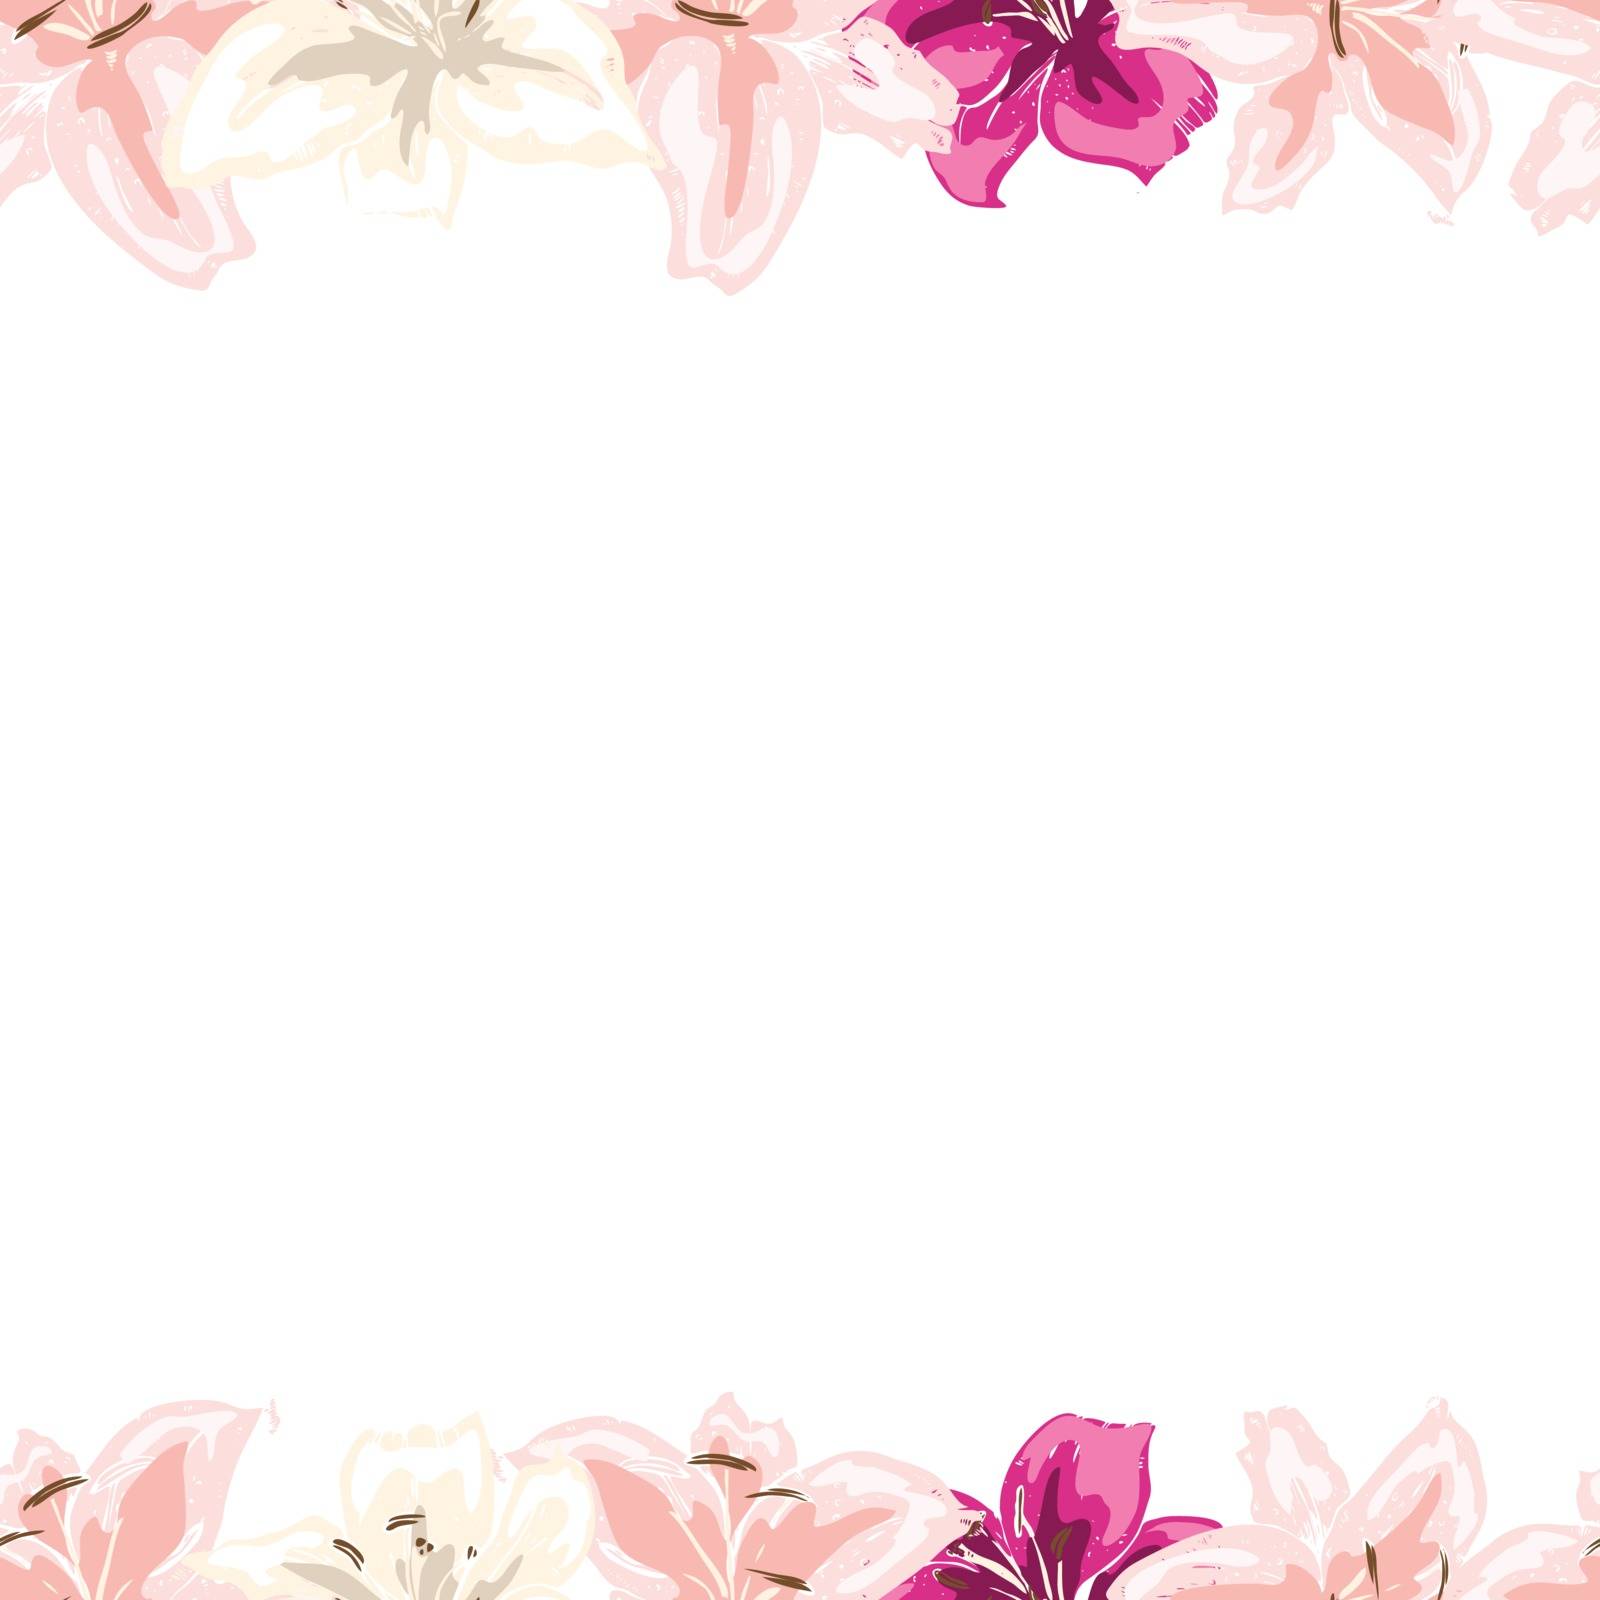 Floral frame of gently pink lilies flowers isolated on white background. Vector